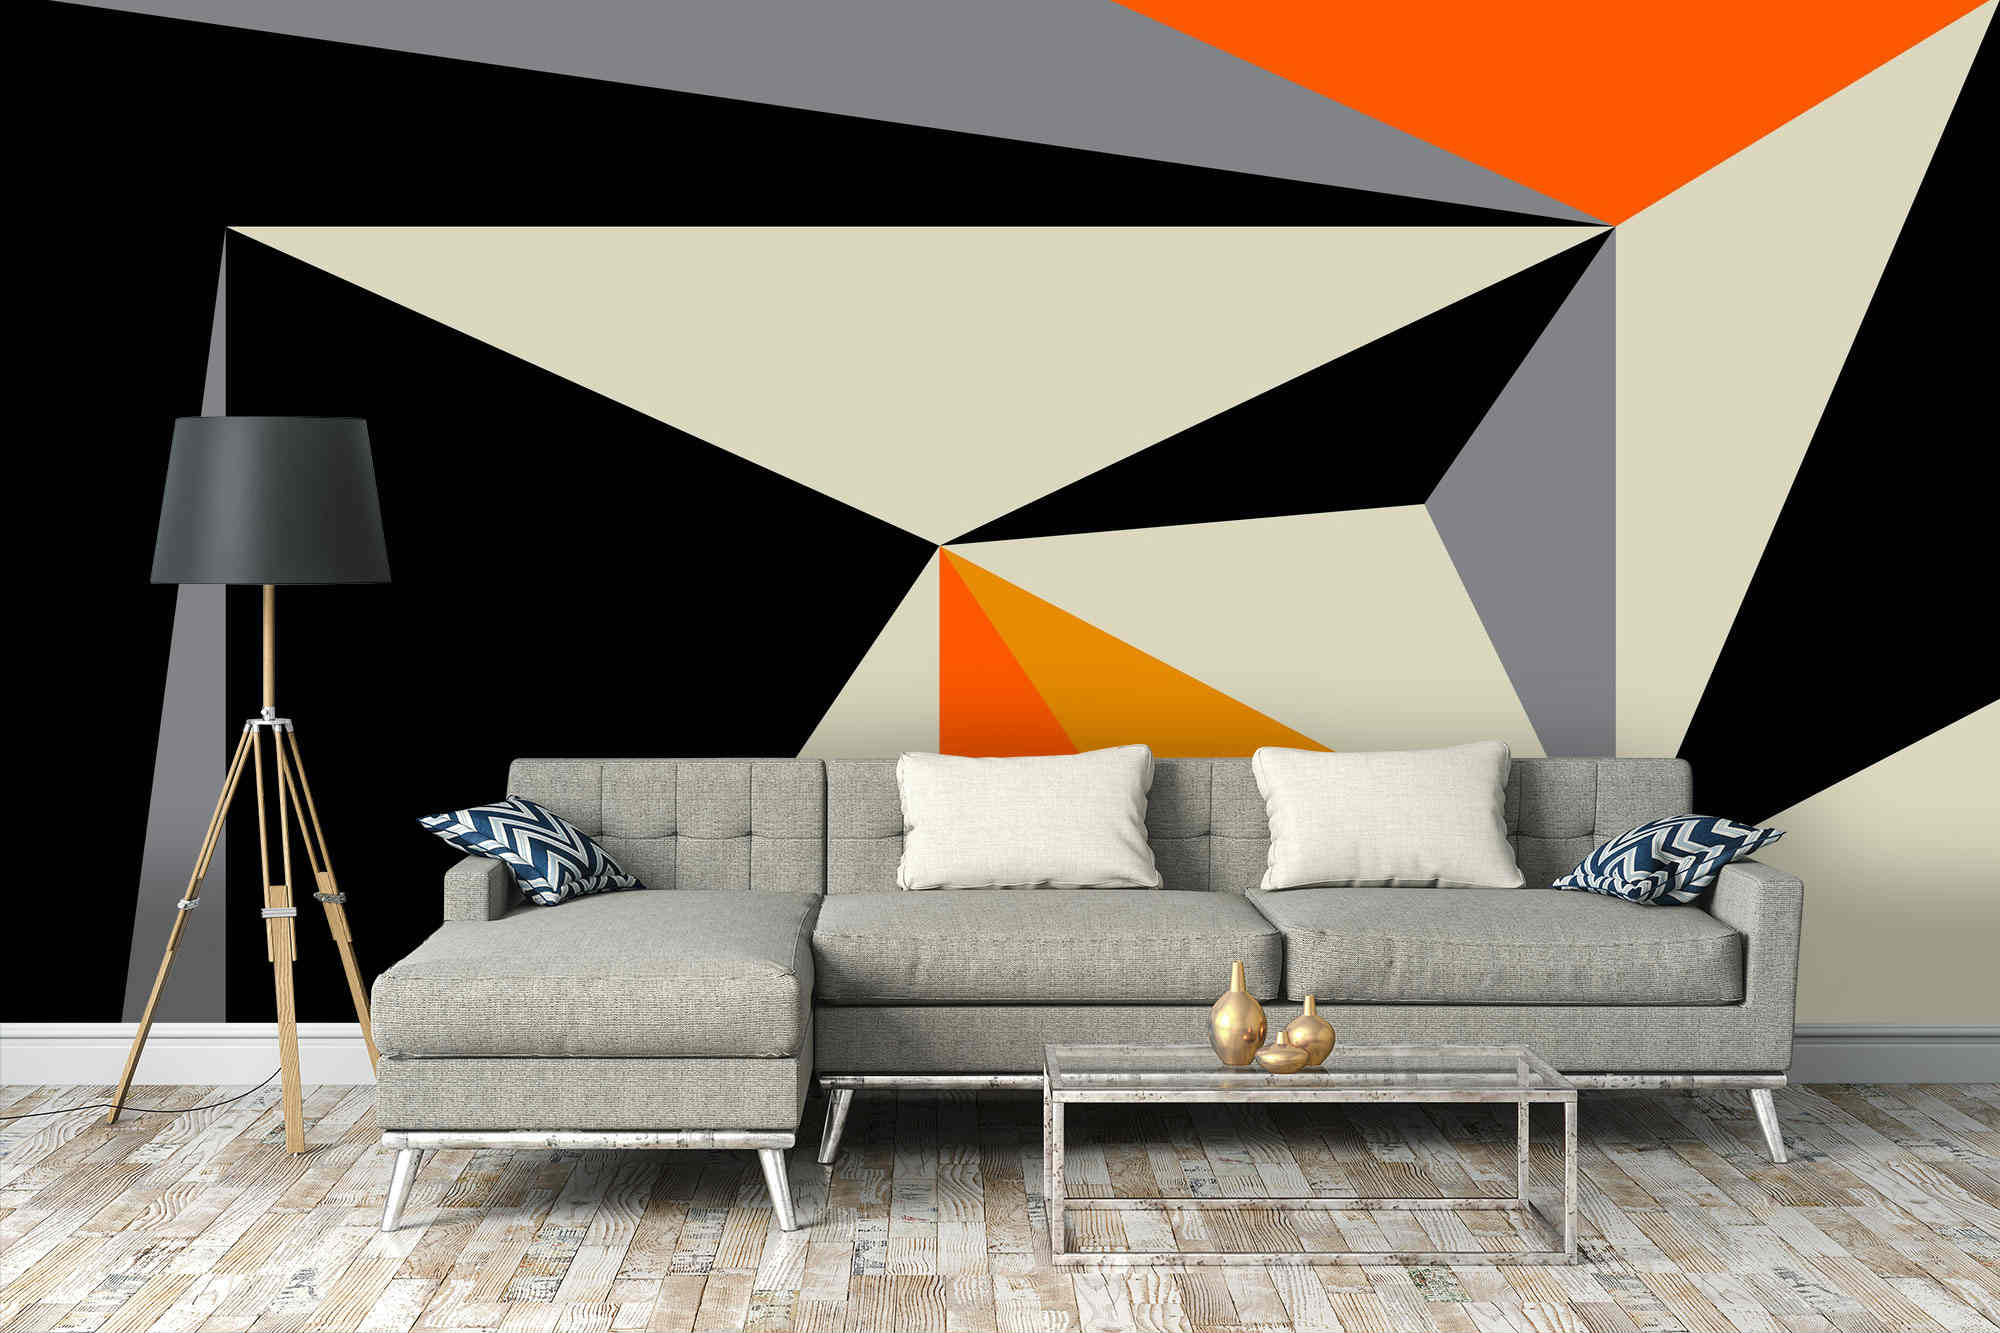 Infuse Your Interiors With The Latest Trend - Geometric Interior Design Trend - HD Wallpaper 